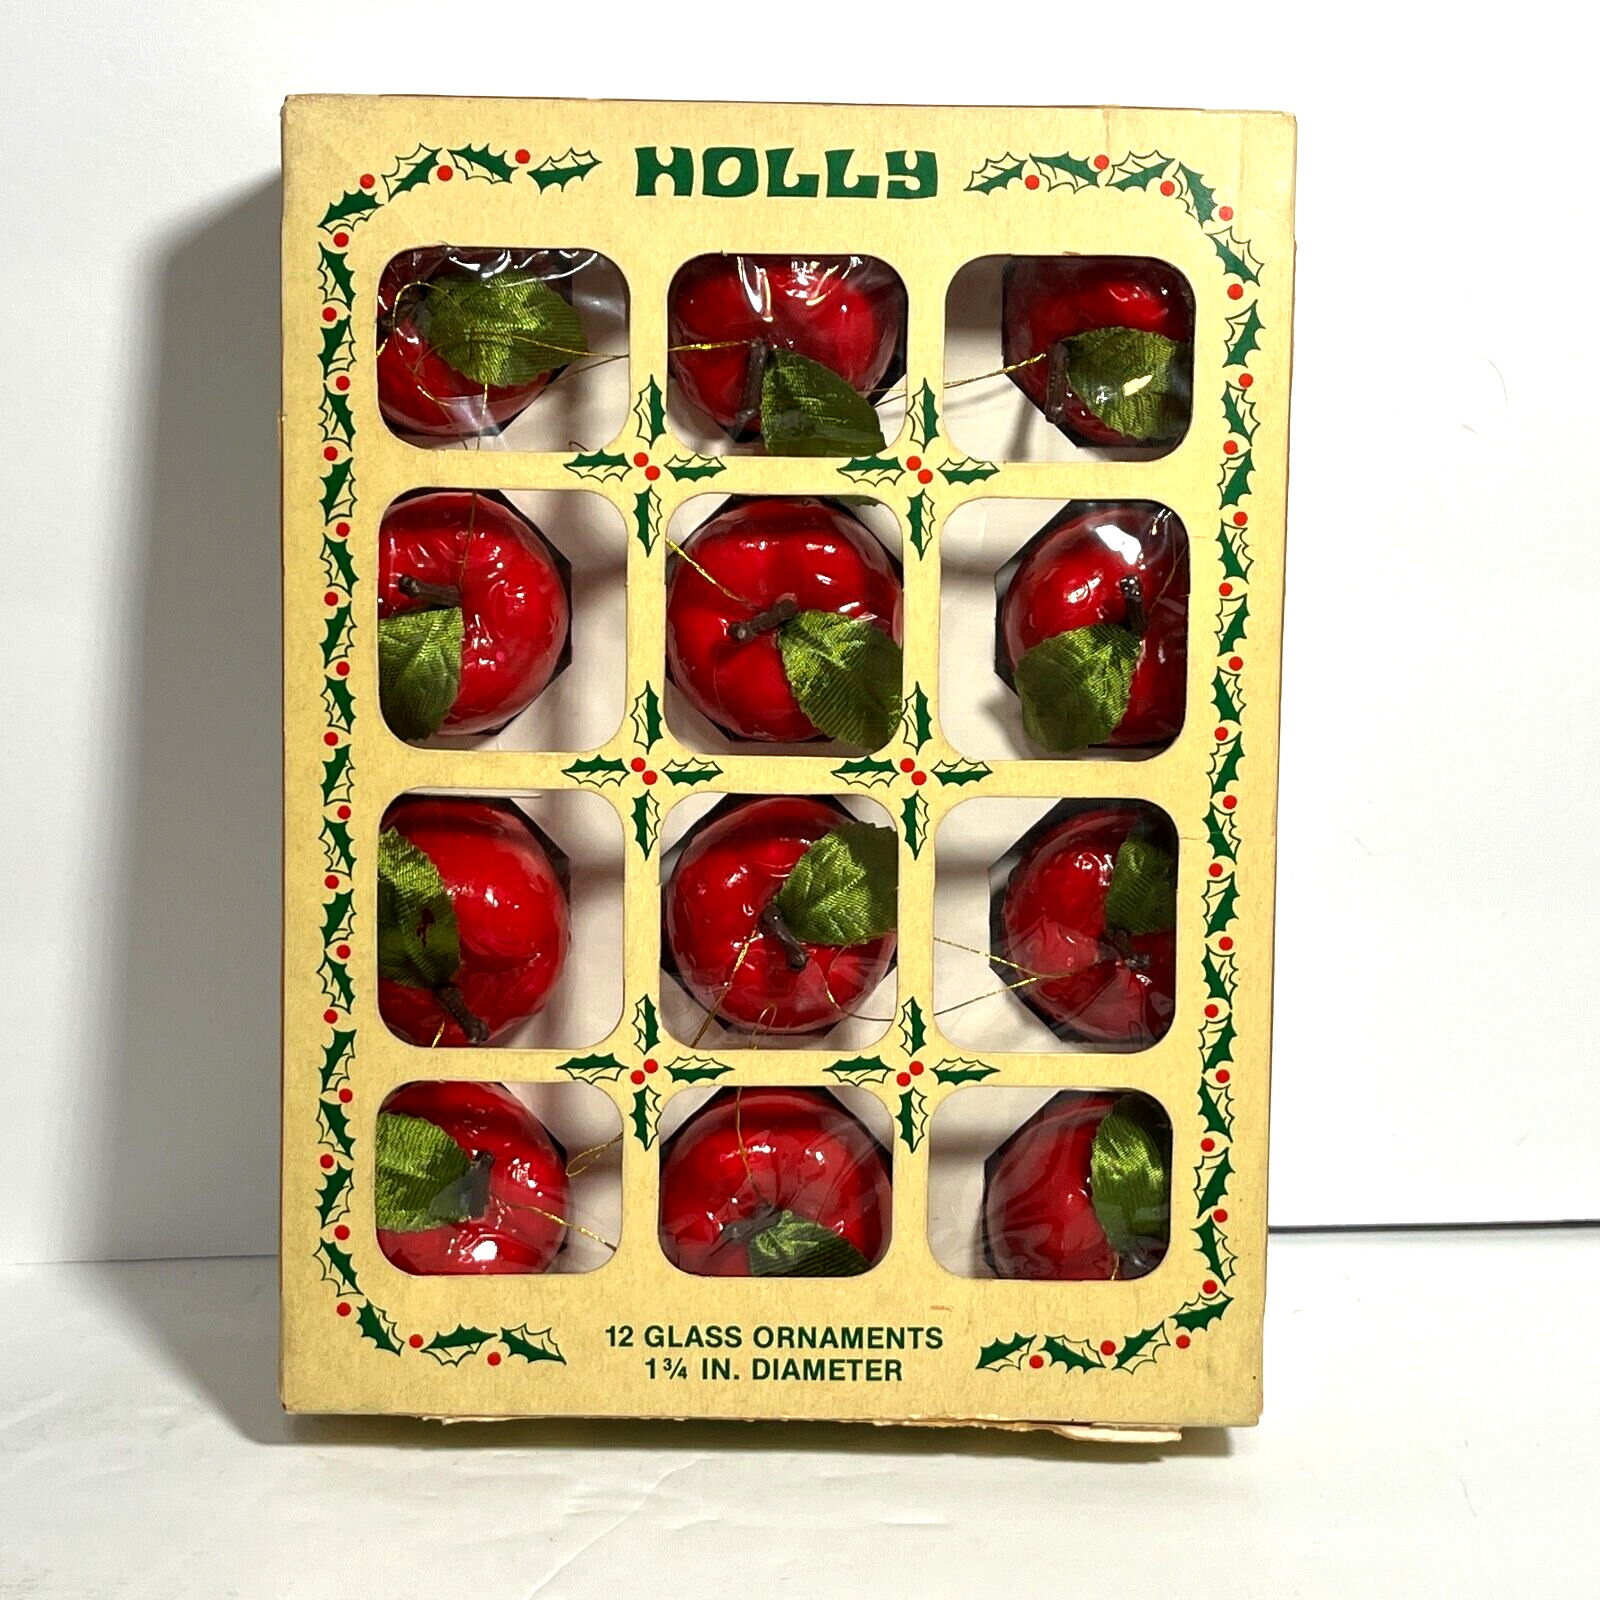 Vintage Holly Glass Apple Christmas Ornaments Box of 12